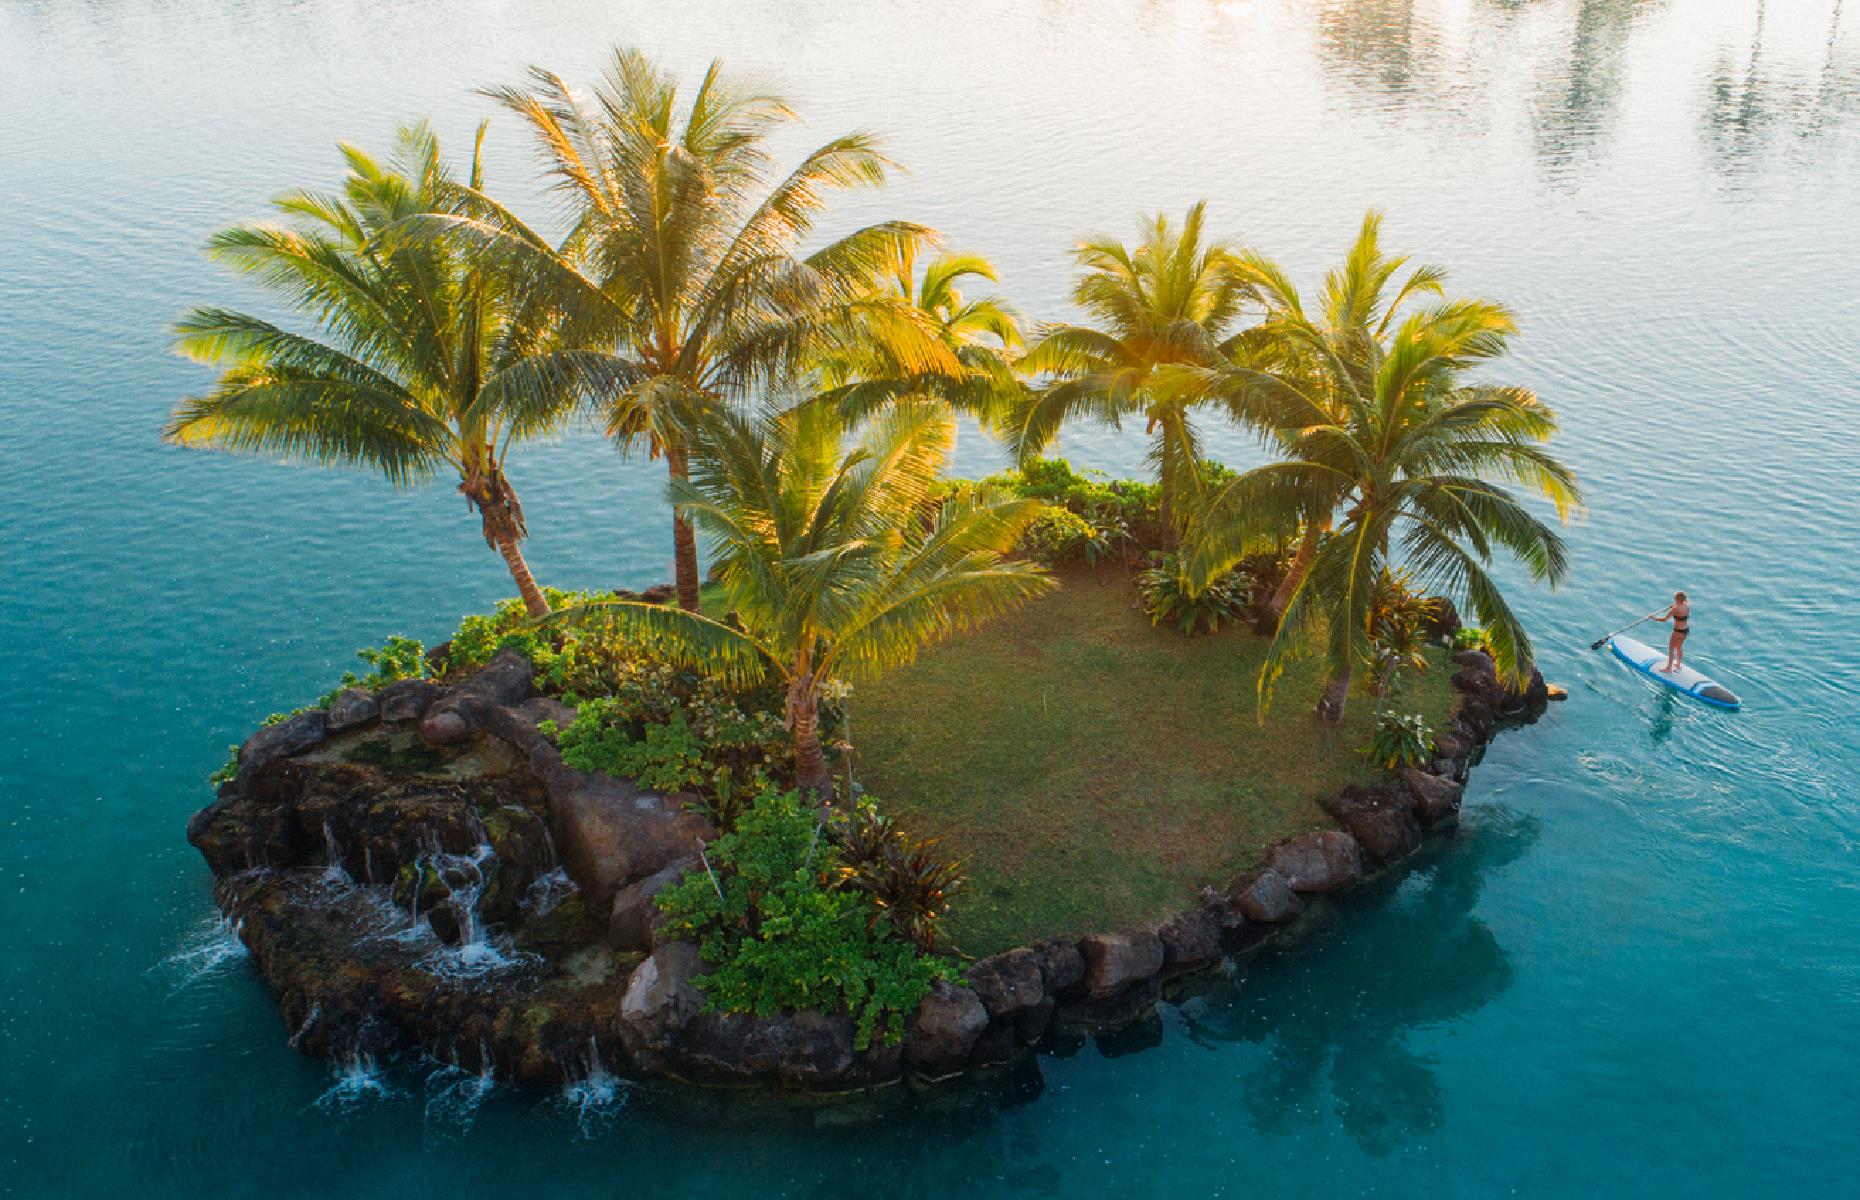 This tree-topped island looks super remote, but it actually floats within a man-made pool in the buzzy Honolulu neighborhood of Waikiki. The Duke Kahanamoku Lagoon, fringed by yellow sands and flanked by hotels, is the perfect city spot for stand-up paddle boarding, kayaking and swimming.